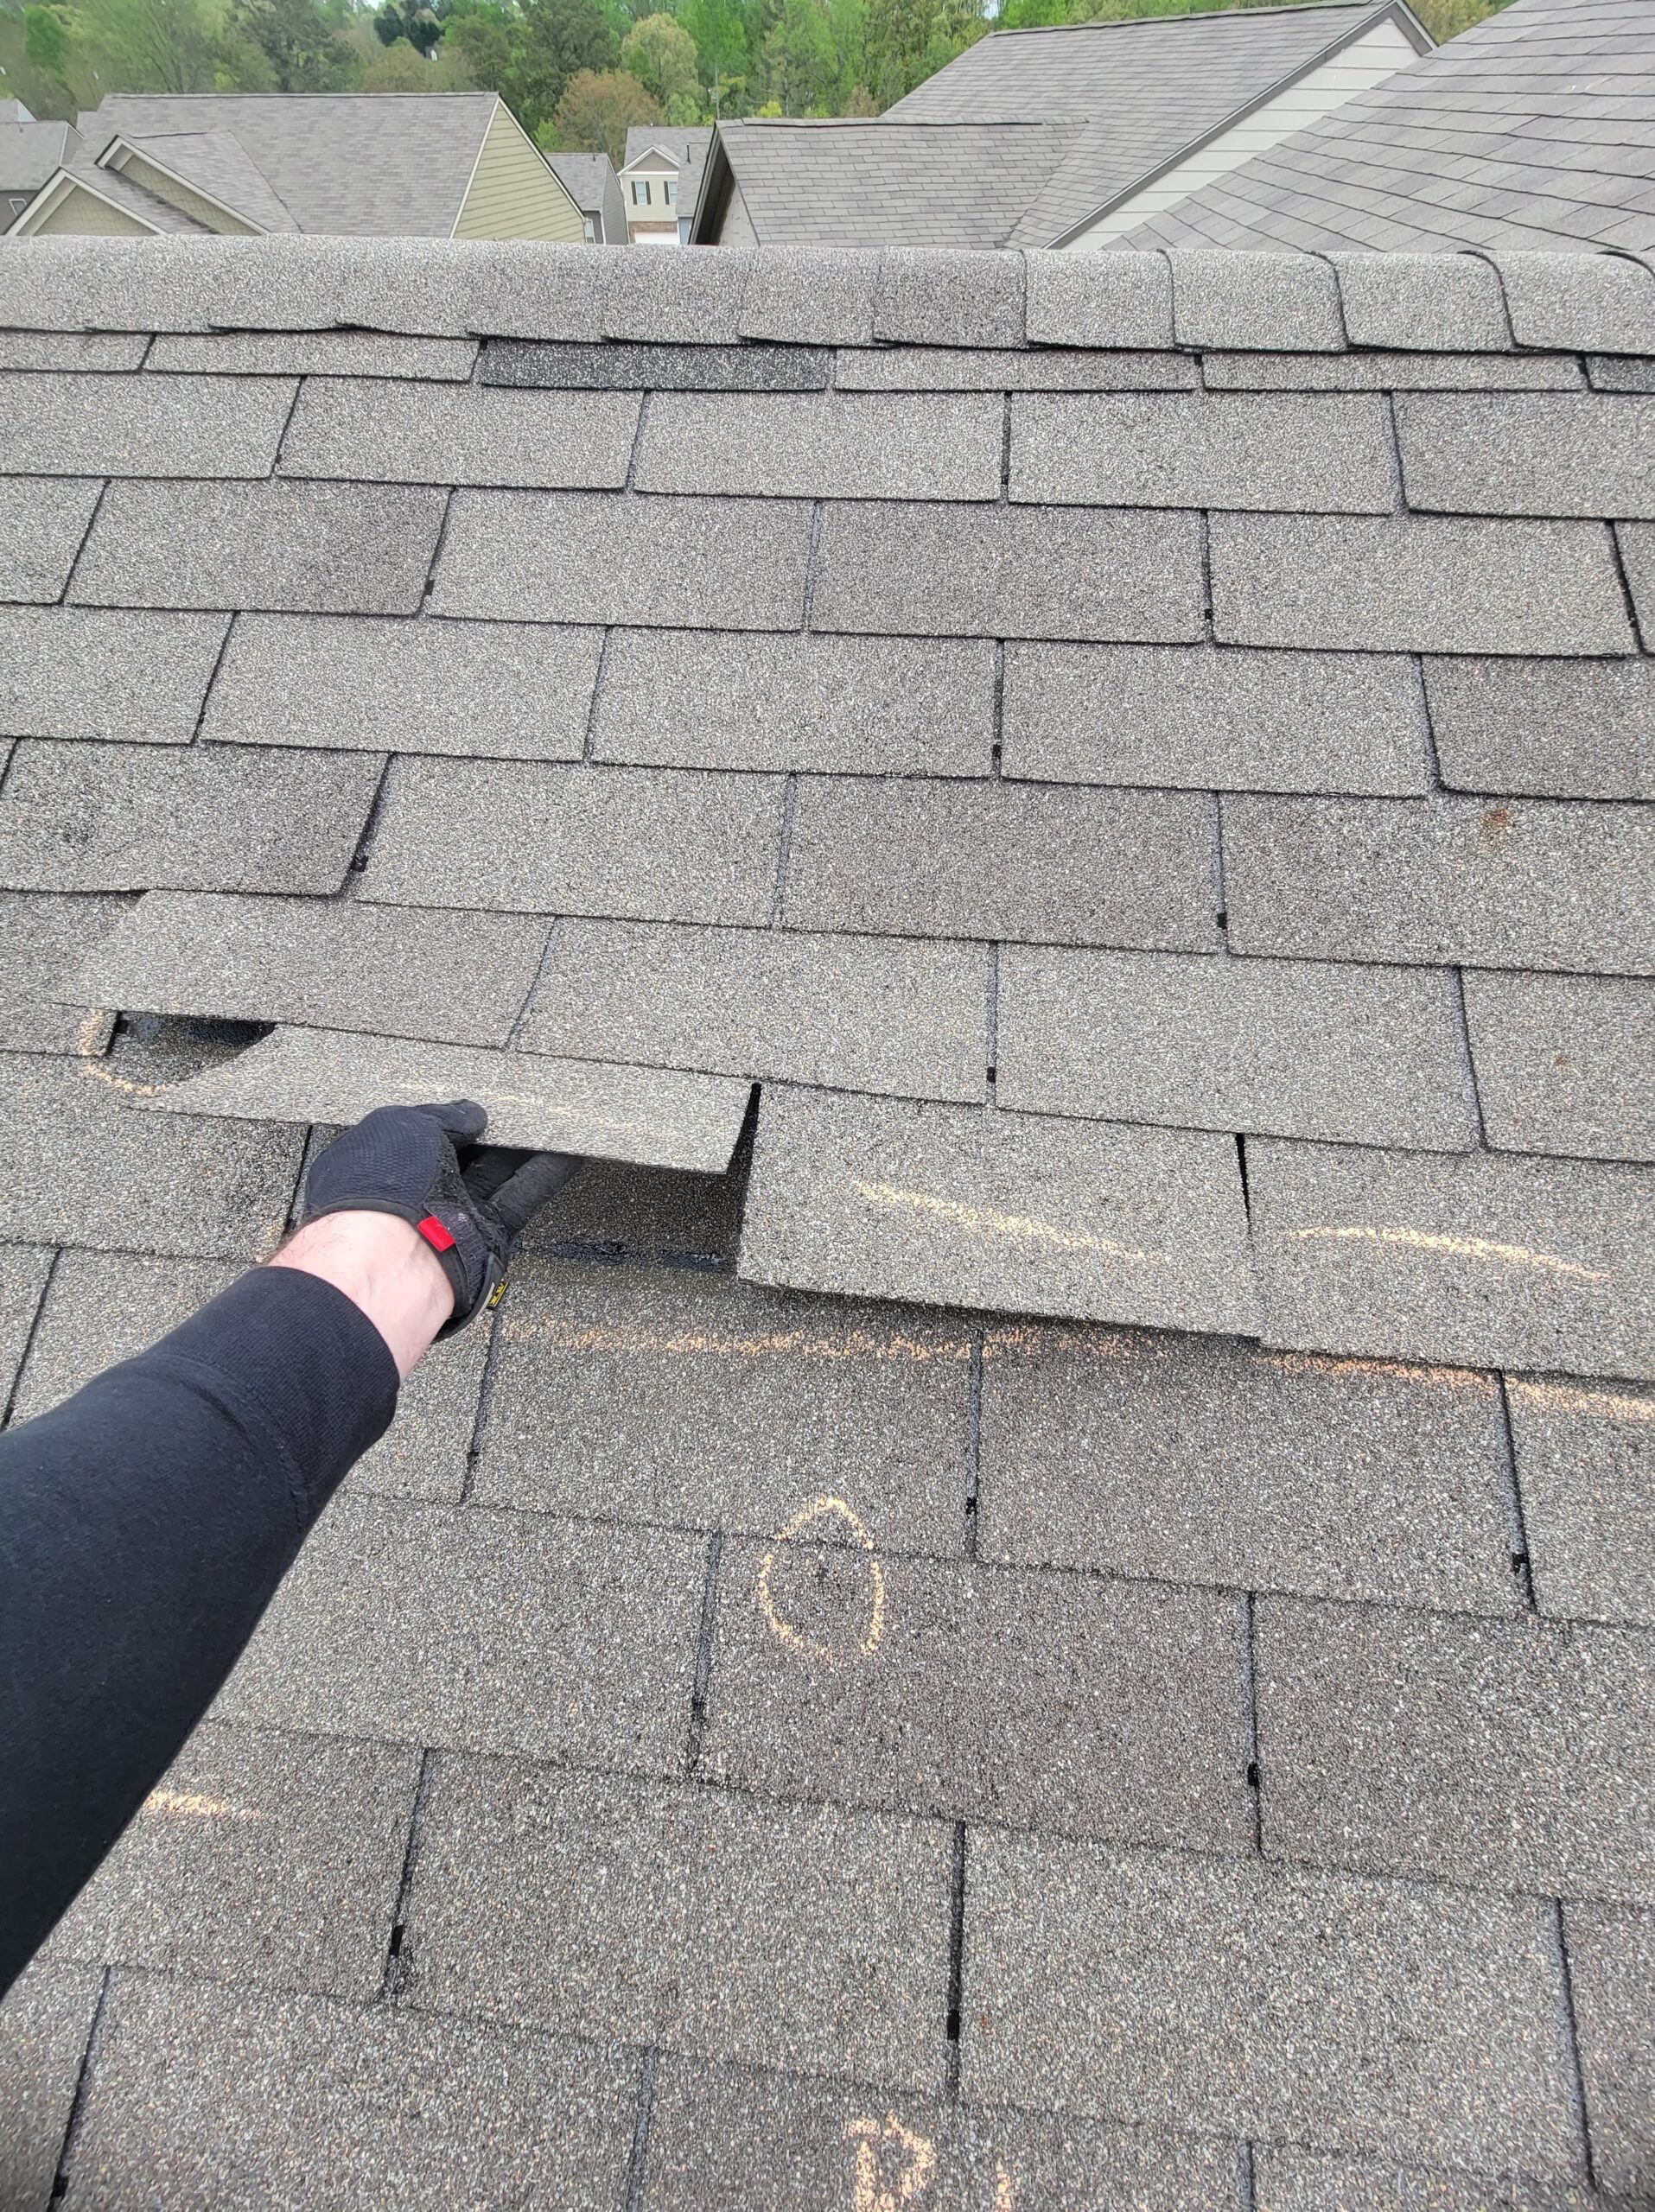 REVIEW NGPR’S ULTIMATE ROOFING DANGER SIGNALS TO LOOK FOR